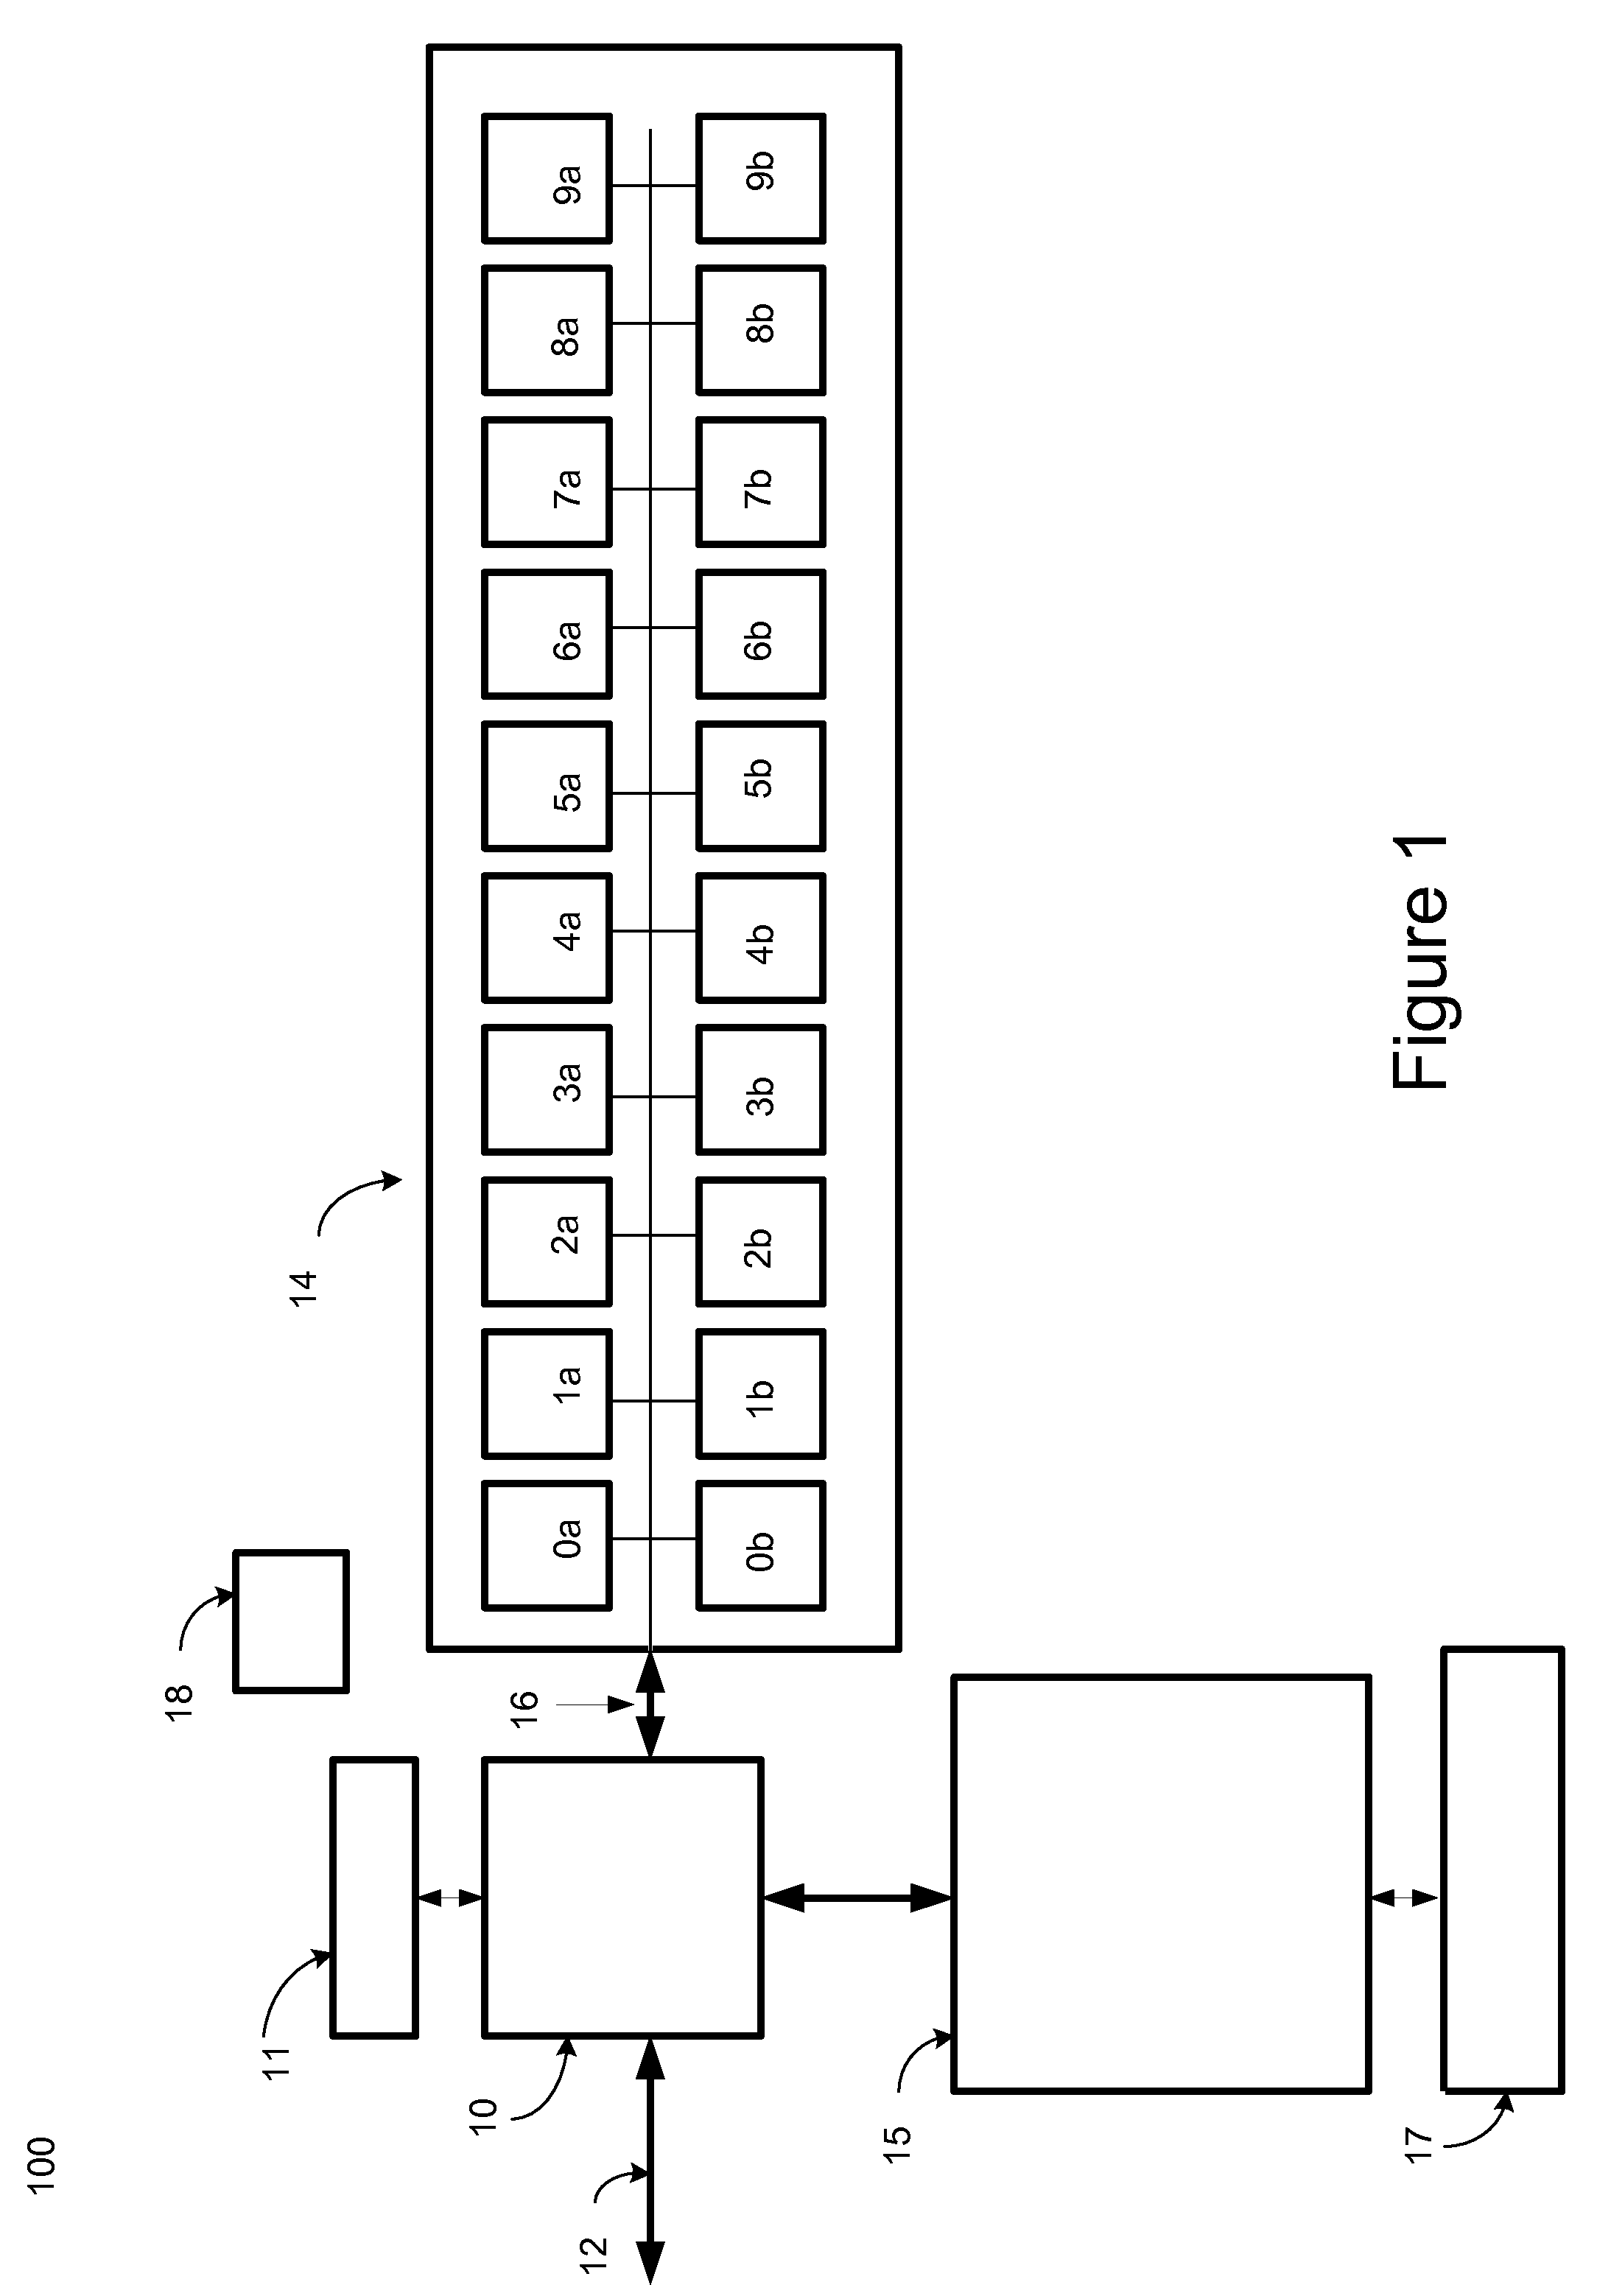 FLASH-based Memory System With Variable Length Page Stripes Including Data Protection Information